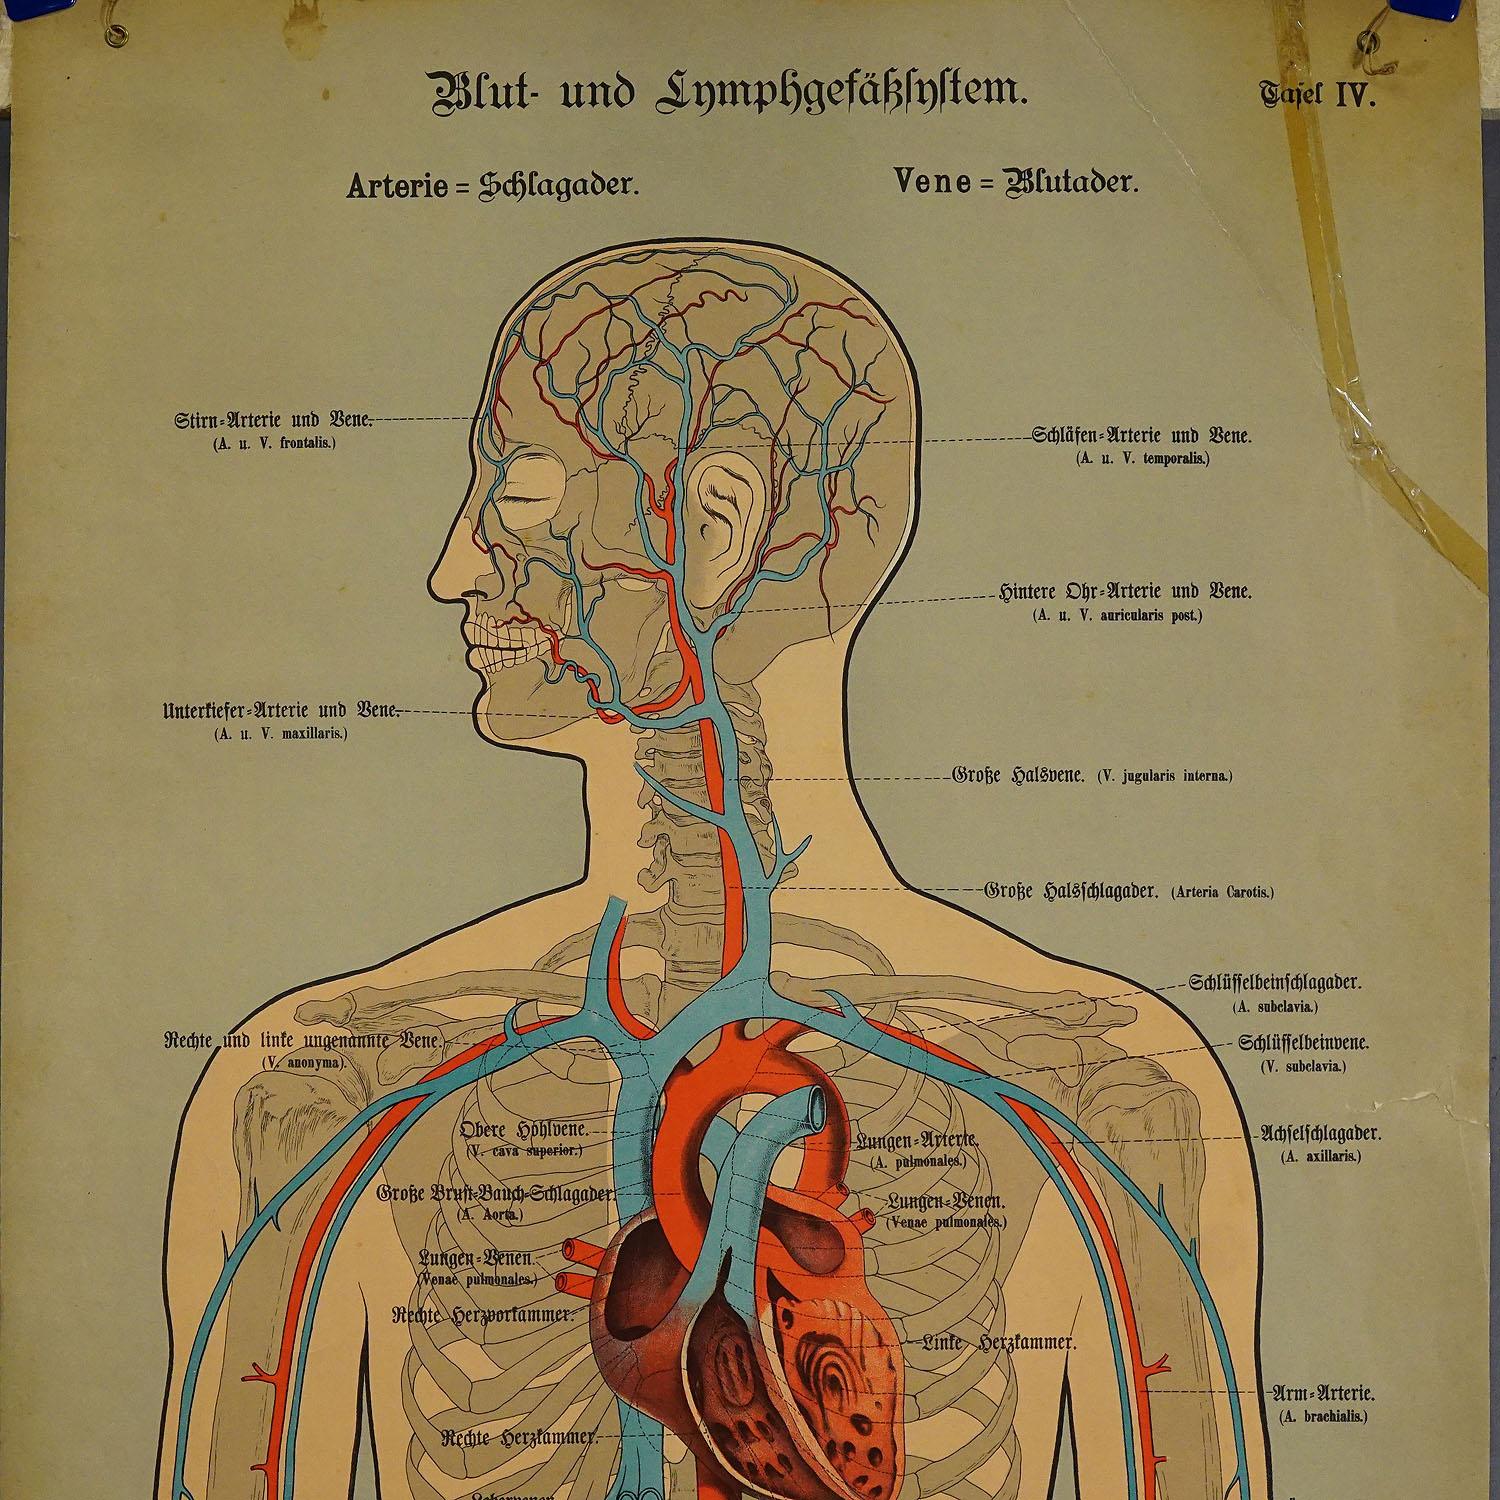 A rare 19-carat anatomical wall chart depicting the human lymphatic and blood vessels. On the sides with detailed description in German language. Printed on cardboard. Published by J. F. Schreiber, Germany, circa 1900. Good original condition with a